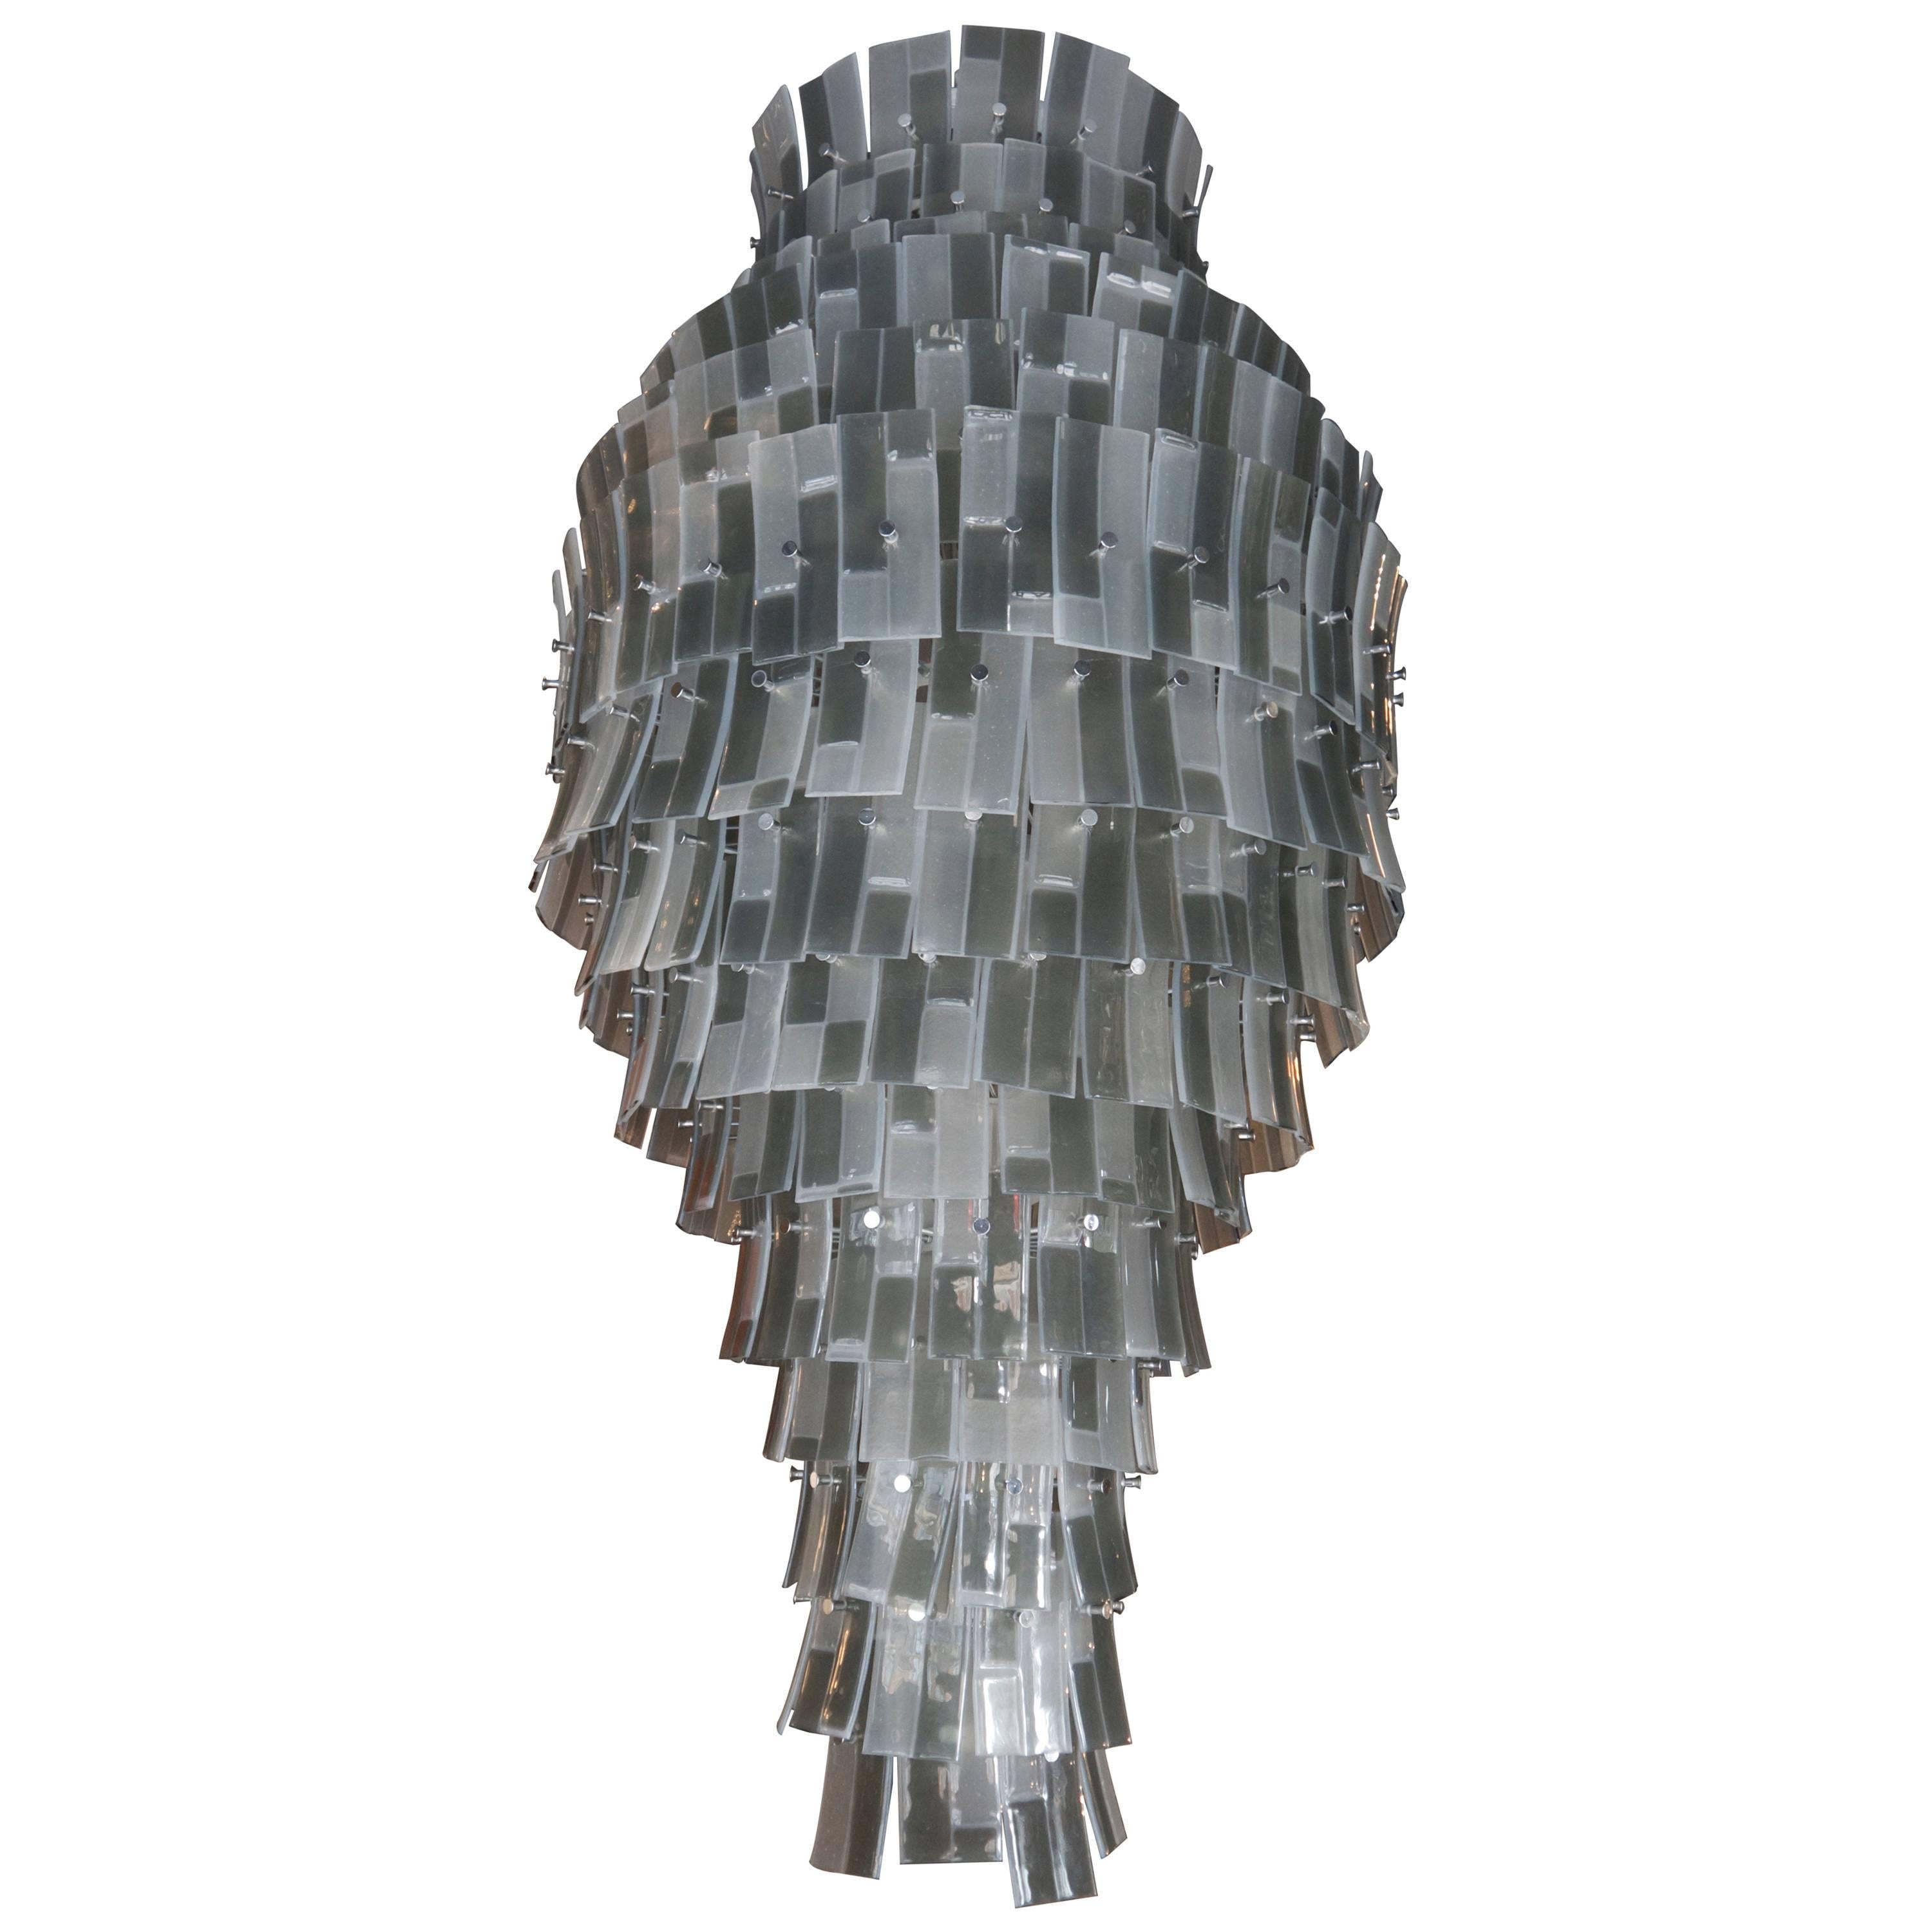 Spectacular Murano Chandelier with Listels in Grey Shades For Sale